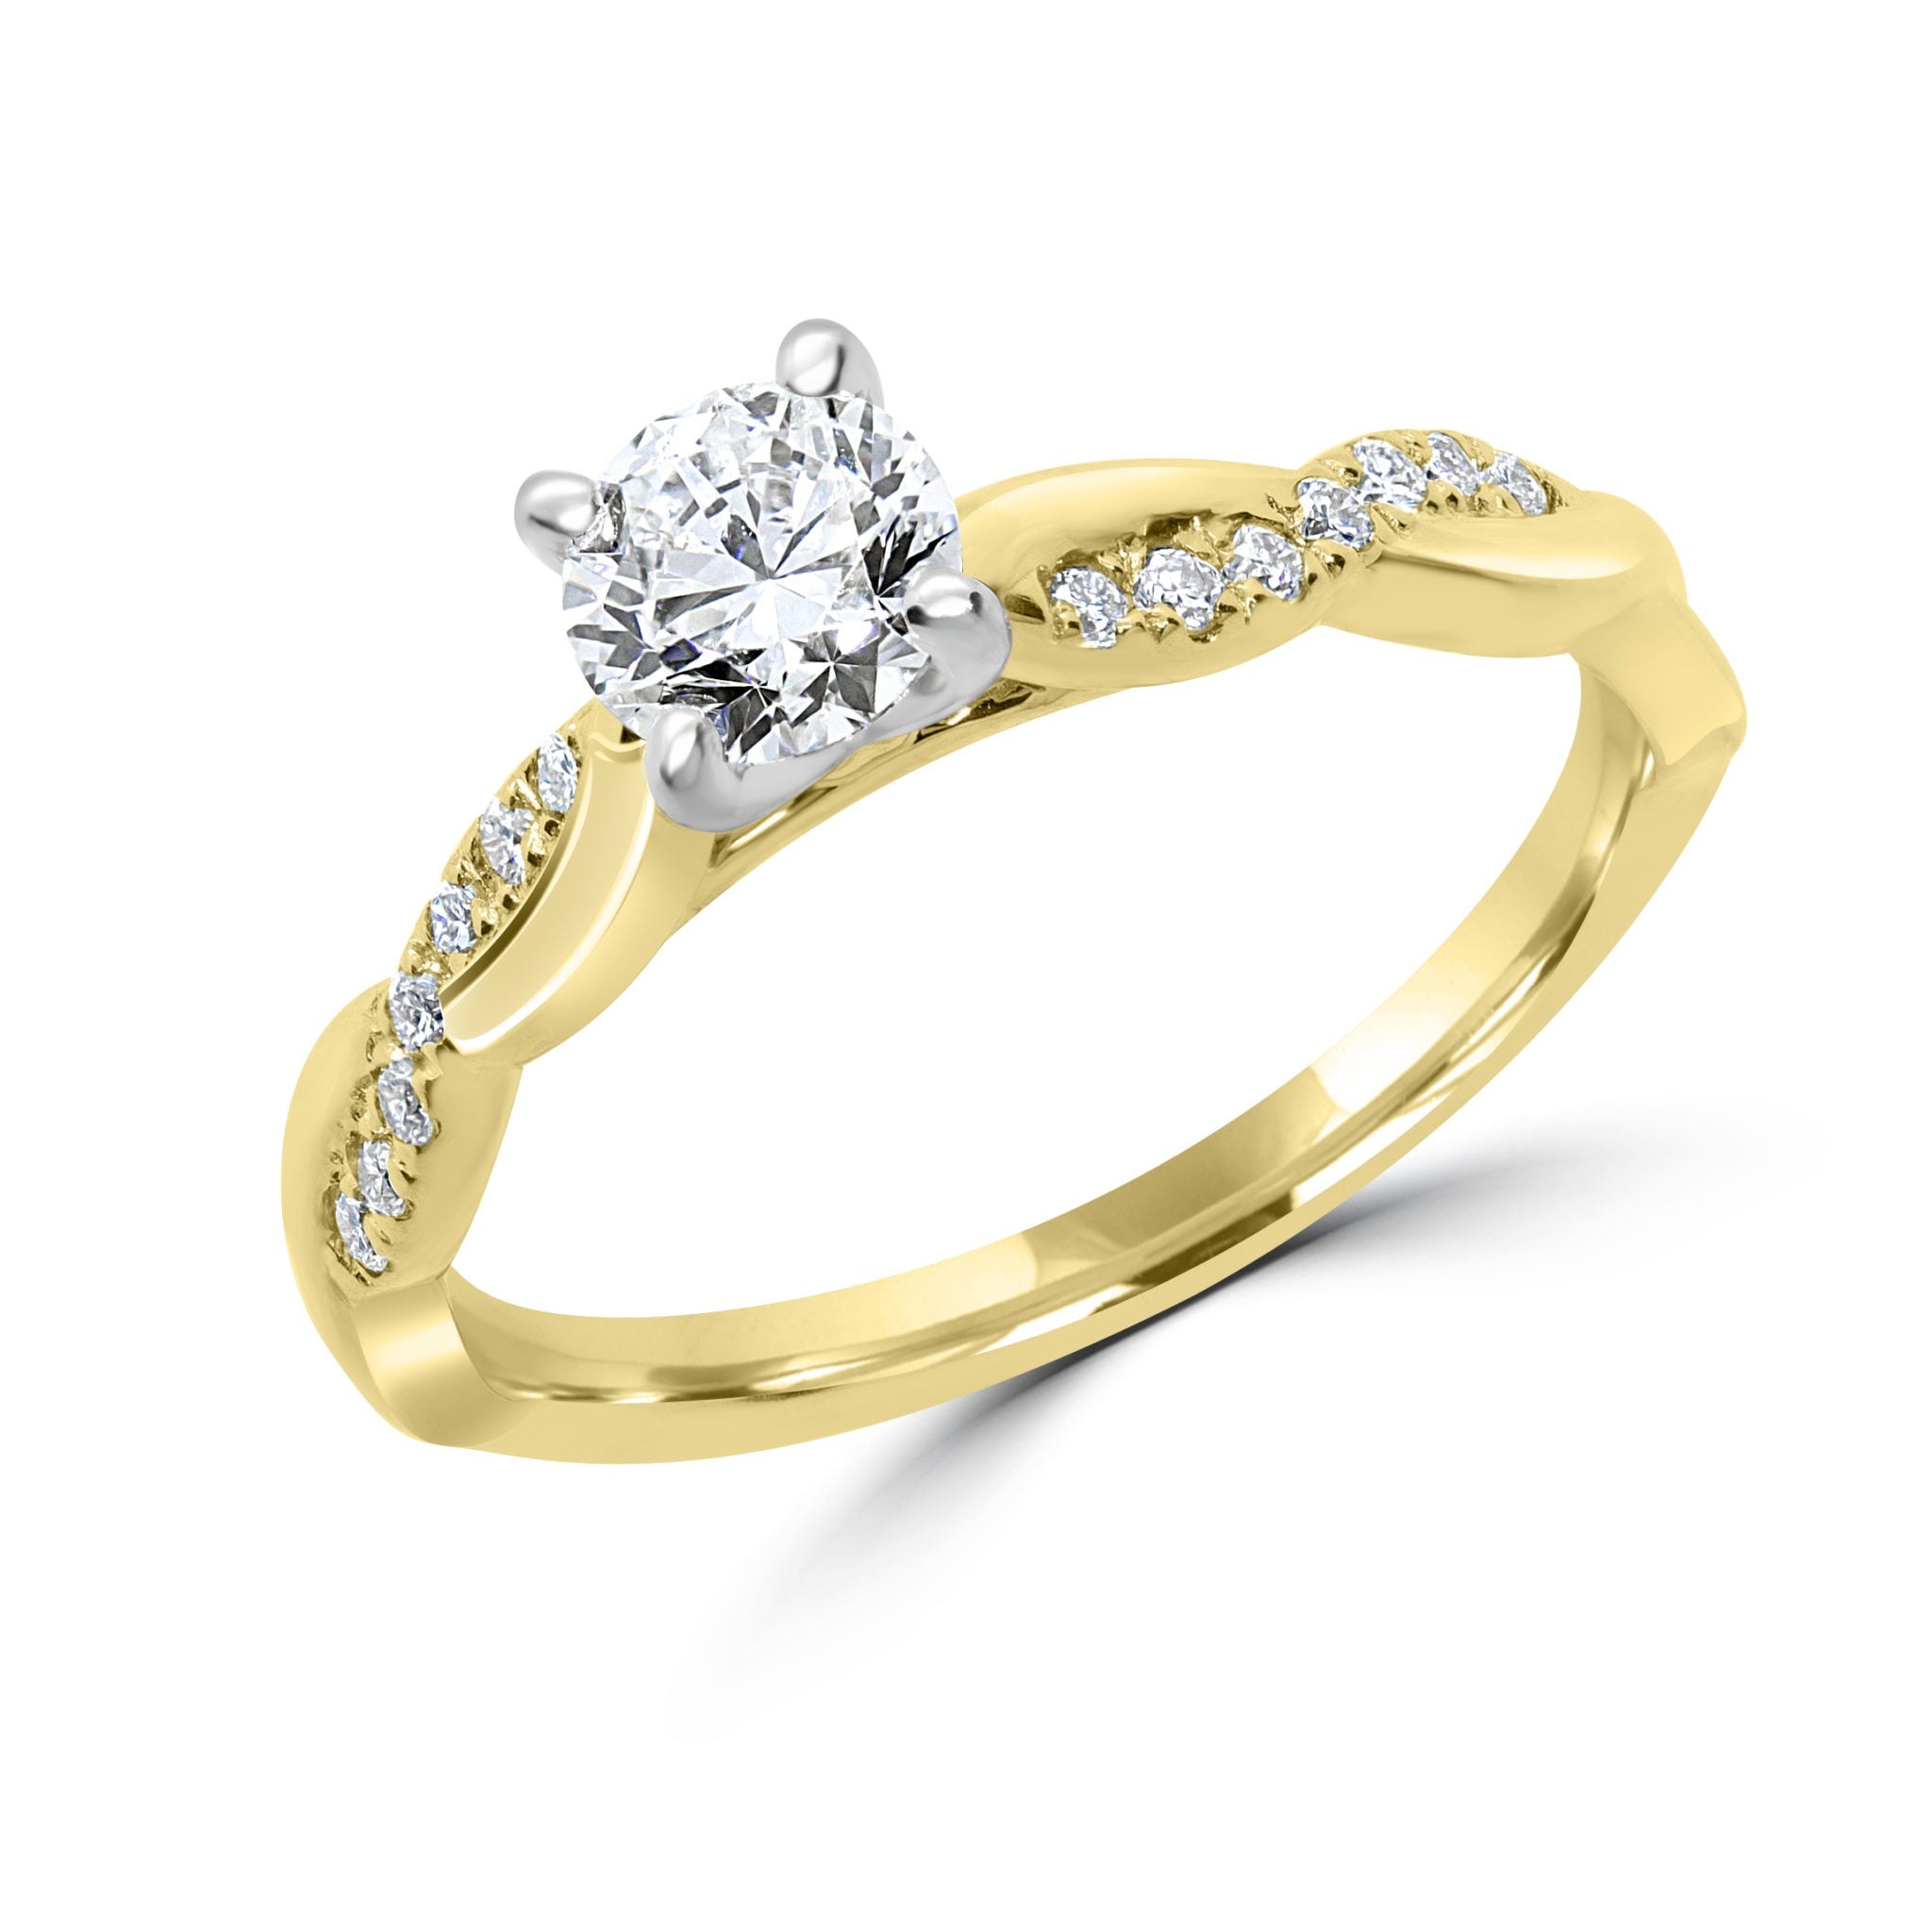 Twisted solitaire lab-grown diamond ring 0.64(ctw) in 14k gold